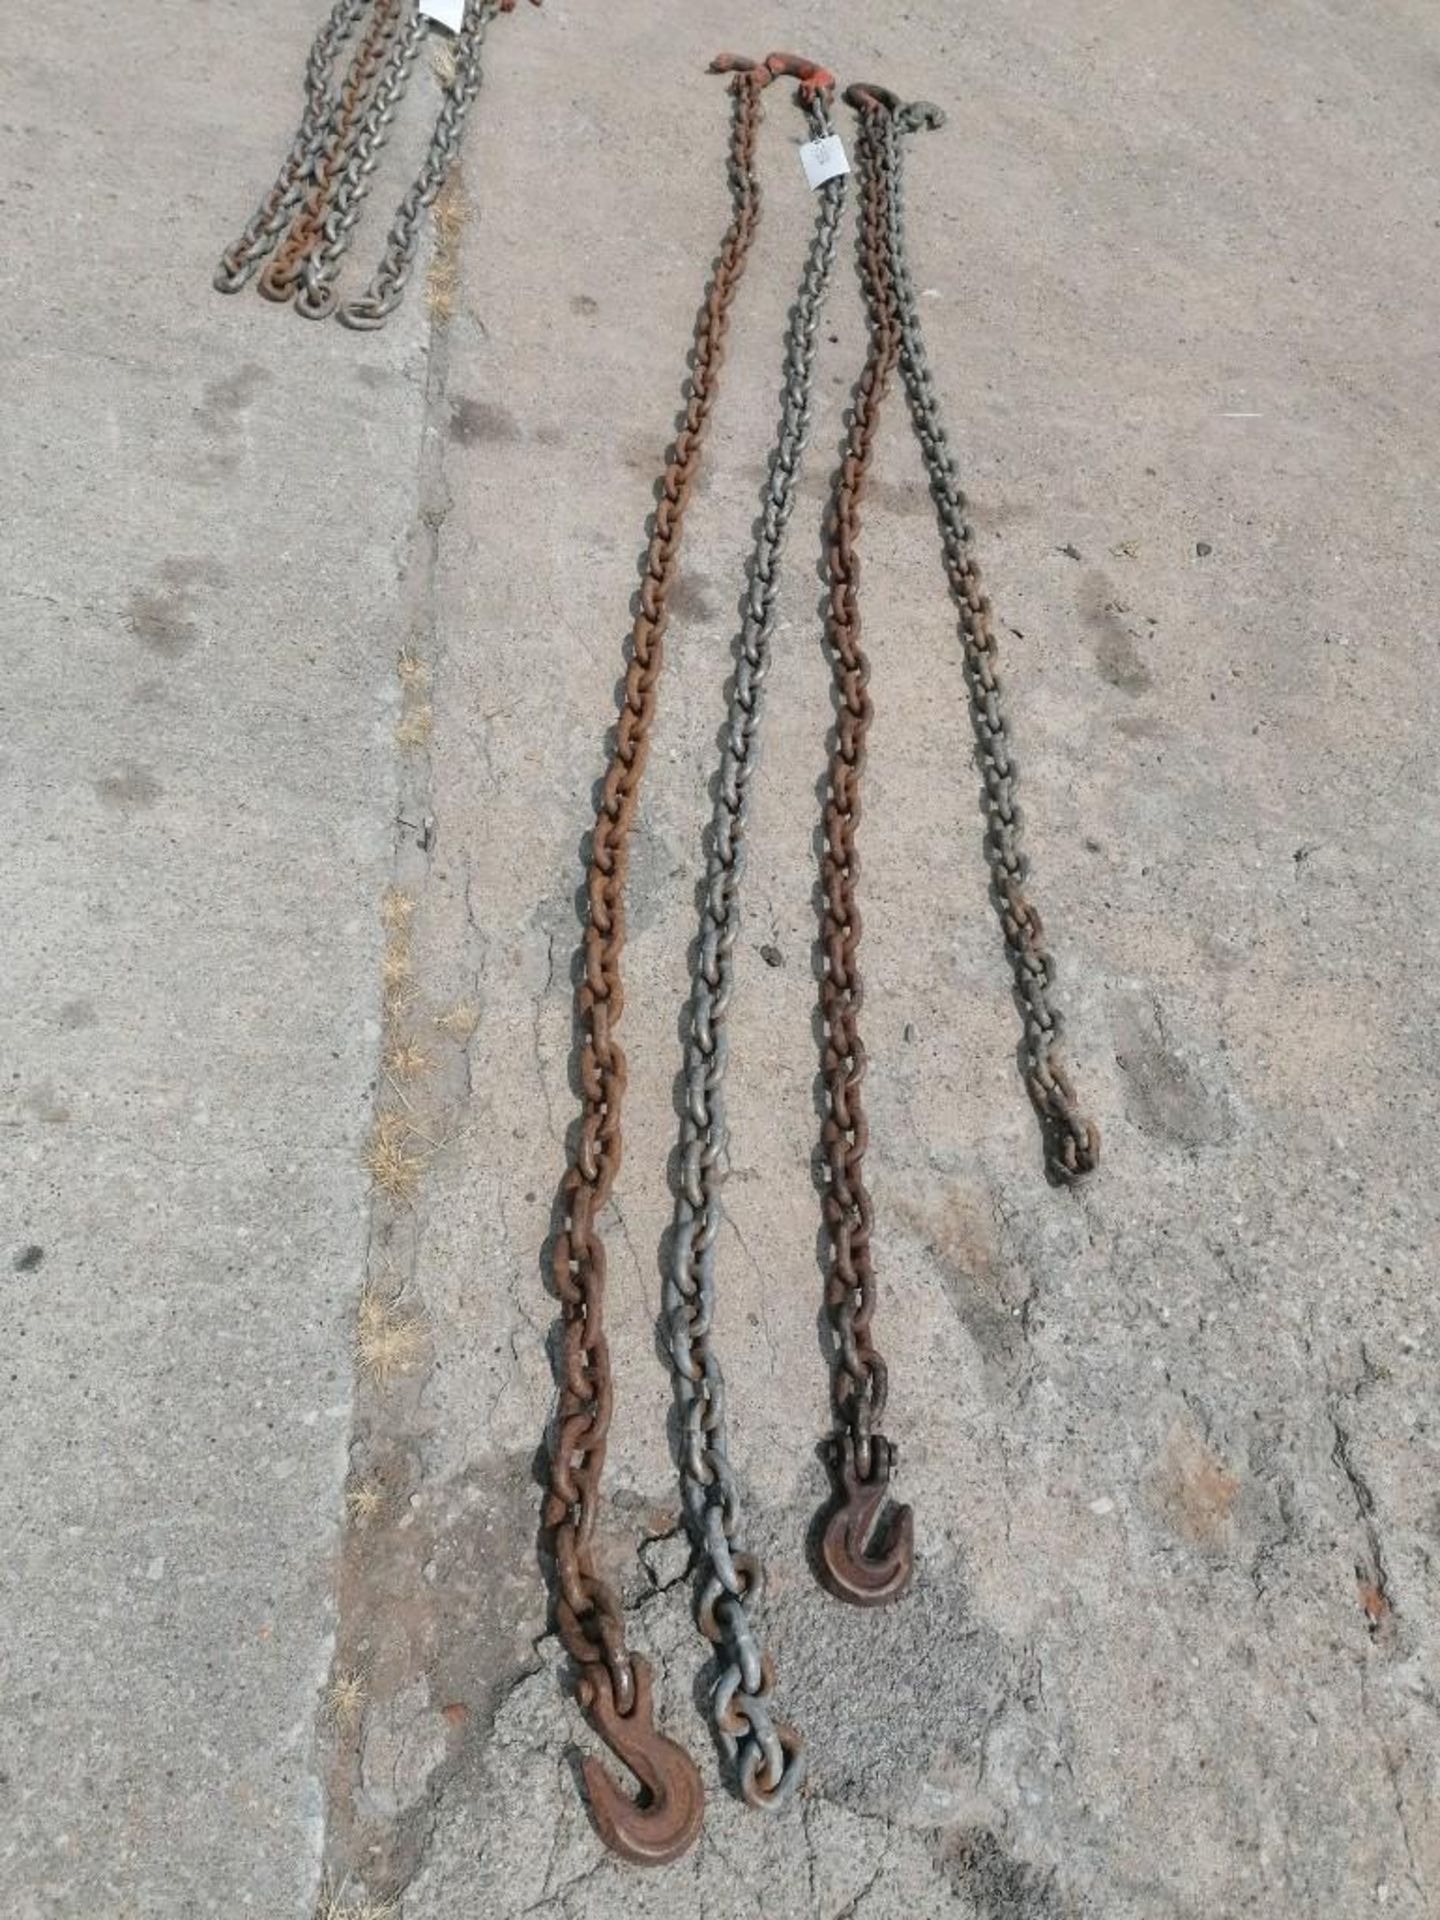 (3) 1/2" USA 9' & (1) 1/2" USA 8' Chain with Hook. Located at 301 E Henry Street, Mt. Pleasant, IA - Image 3 of 3